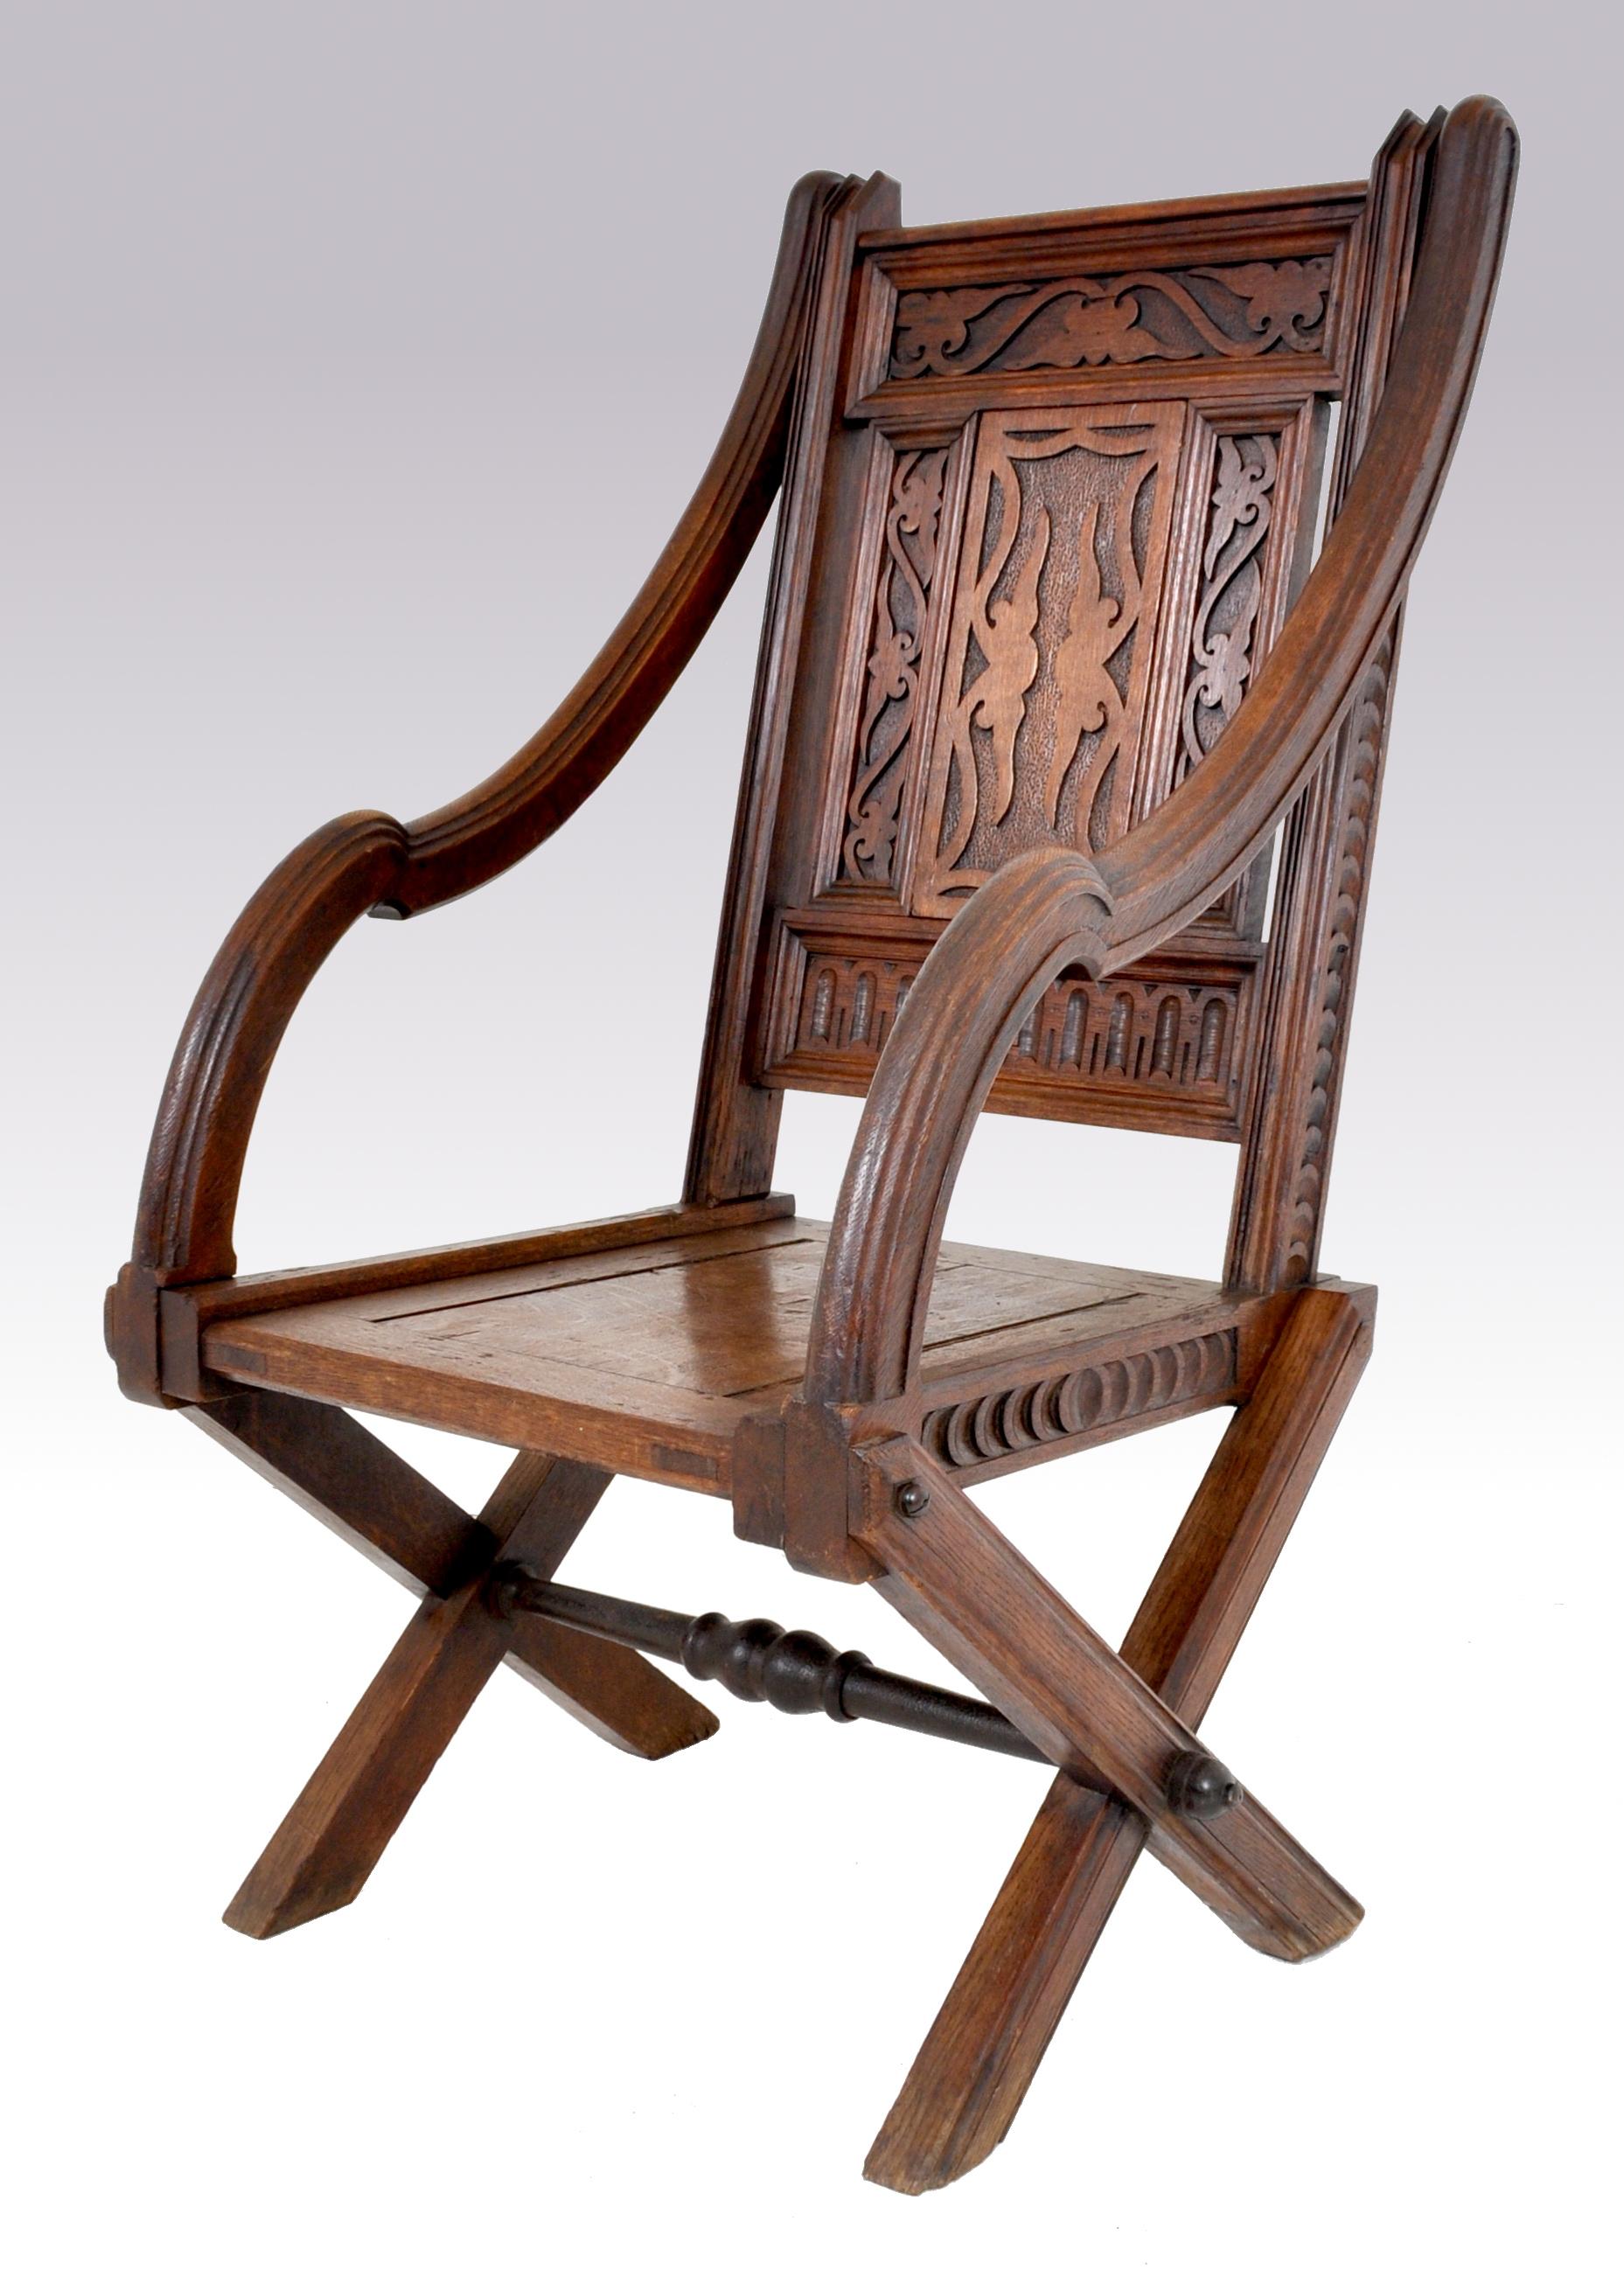 Antique carved English Gothic Revival Bishop's throne chair, A. W. Pugin, circa 1855. The chair having a 'blind' geometric fretwork back with shaped arms and 